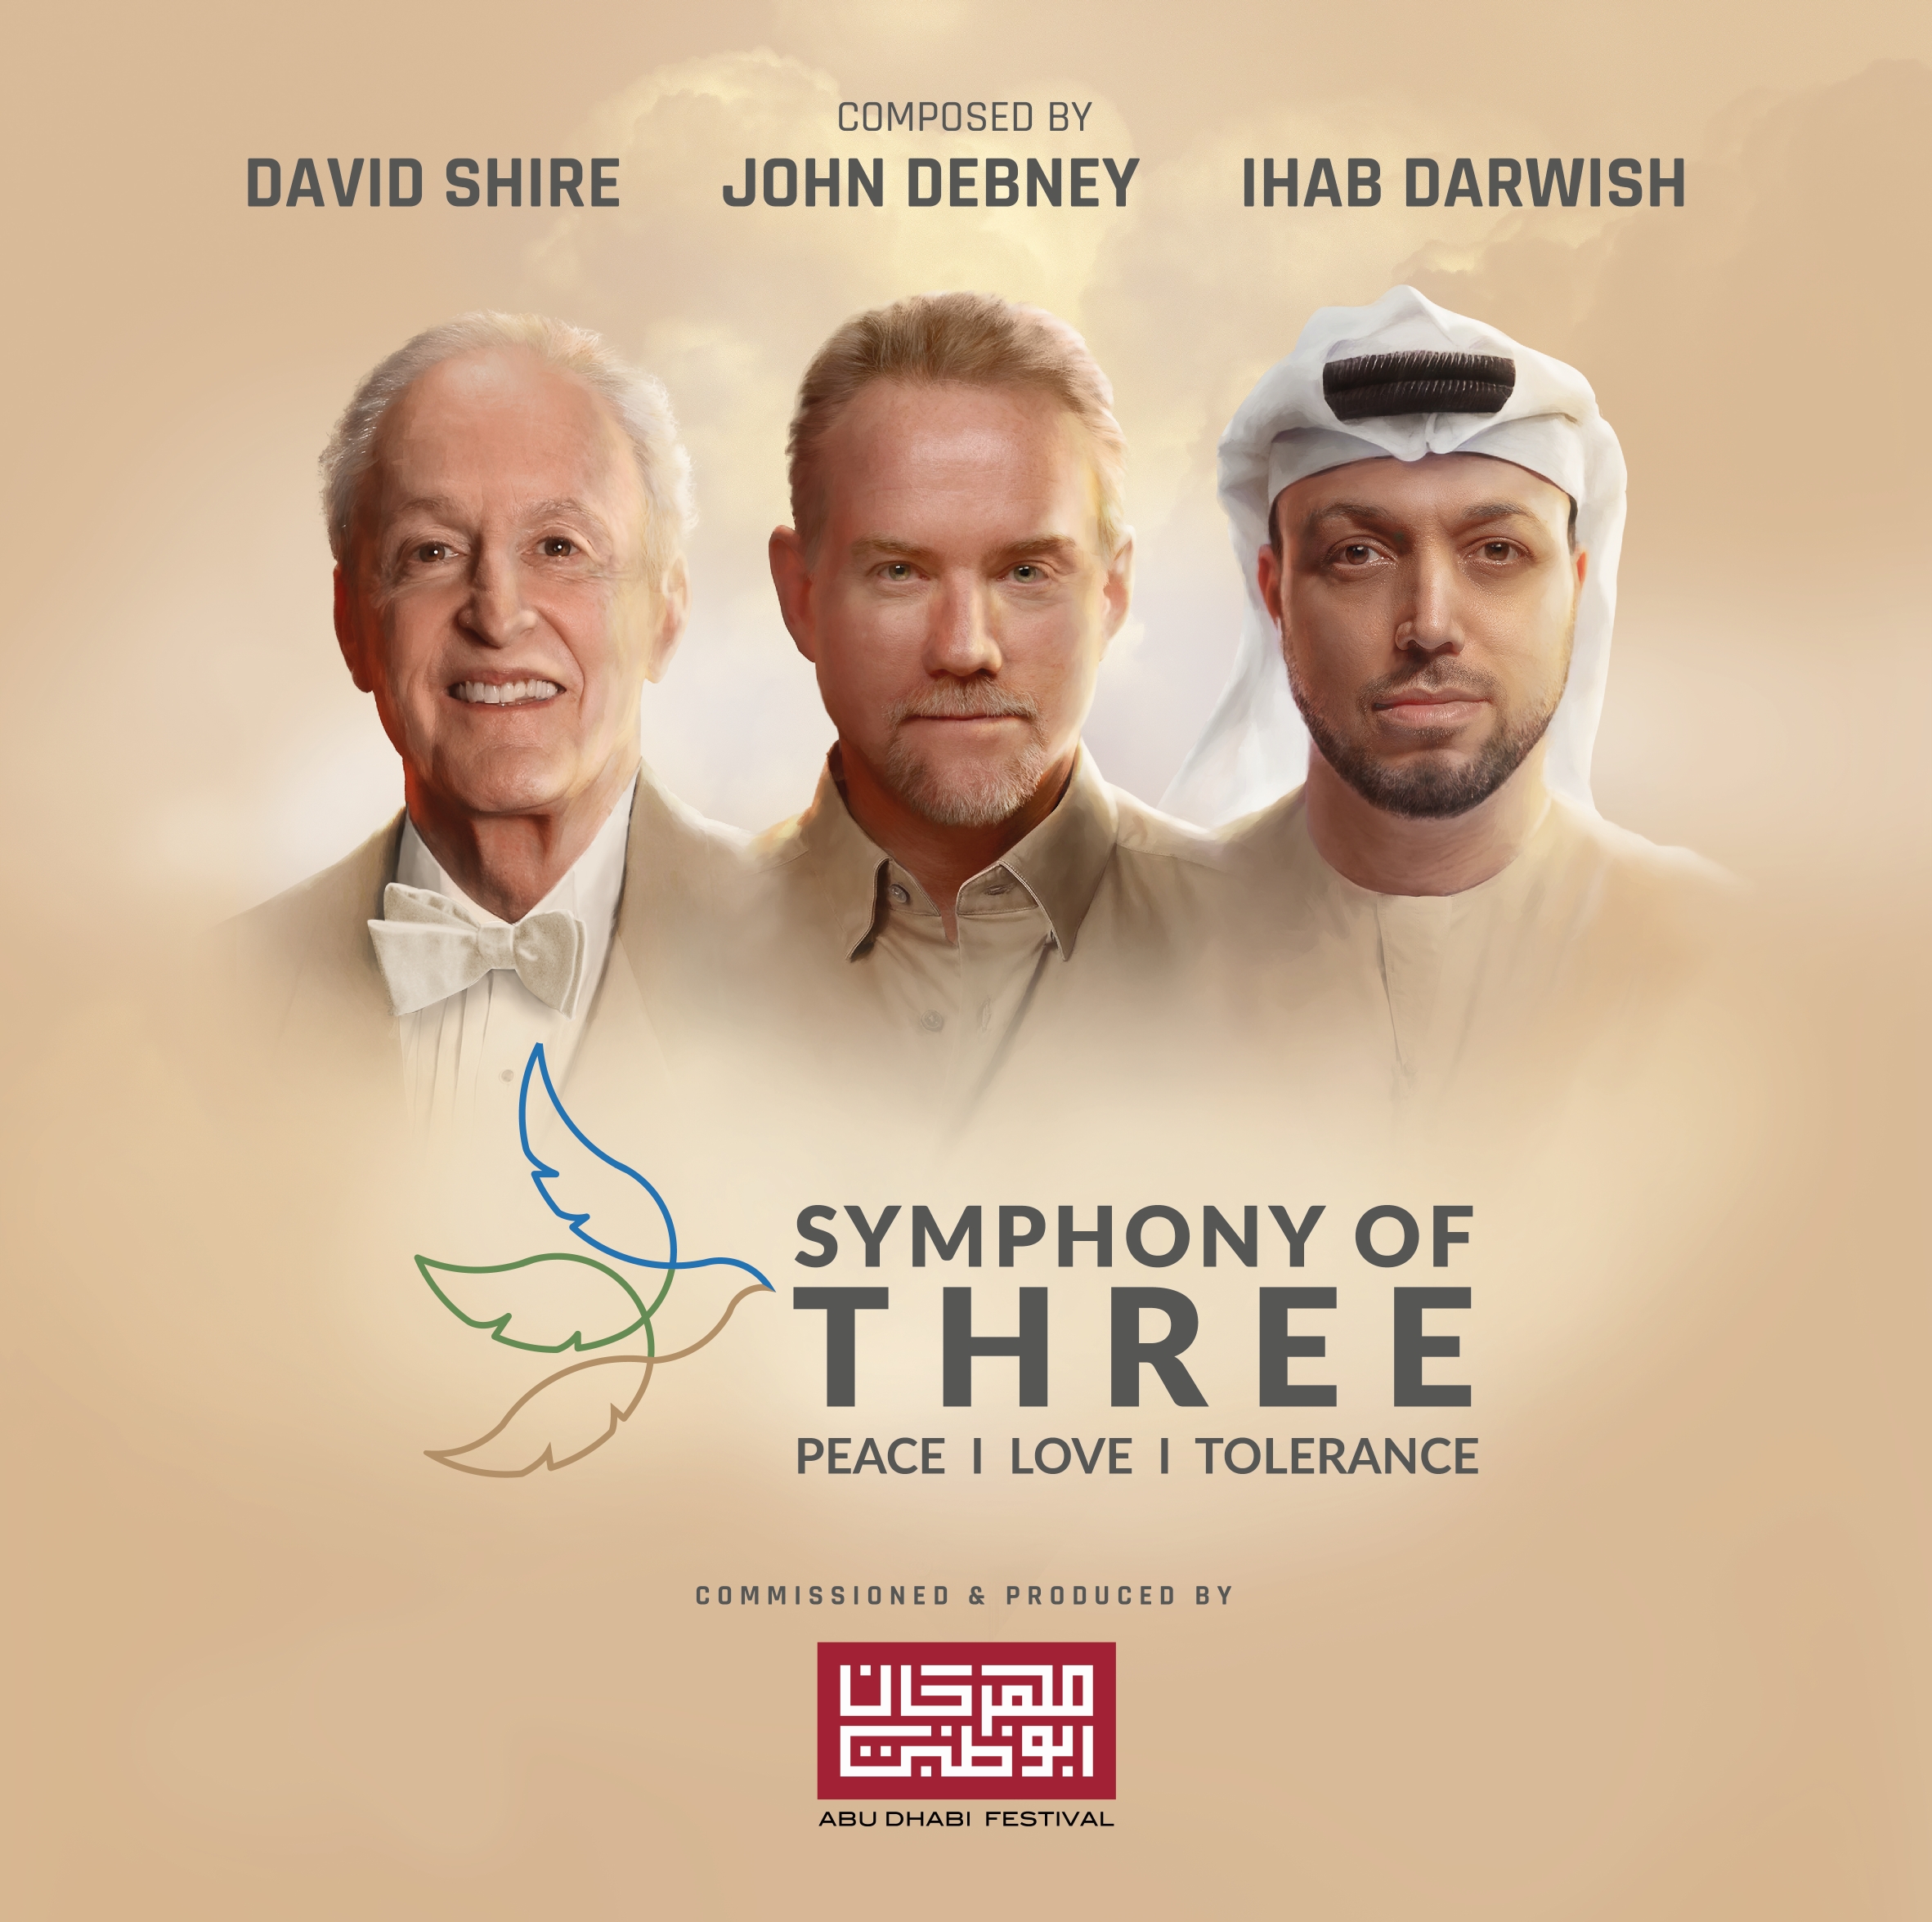 As Part Of Its Exclusive Commissions And World Premieres Abu Dhabi Festival To Host World Premiere Of “Symphony Of Three:  Peace, Love, Tolerance” By Emirati Composer Ihab Darwish On December 30th